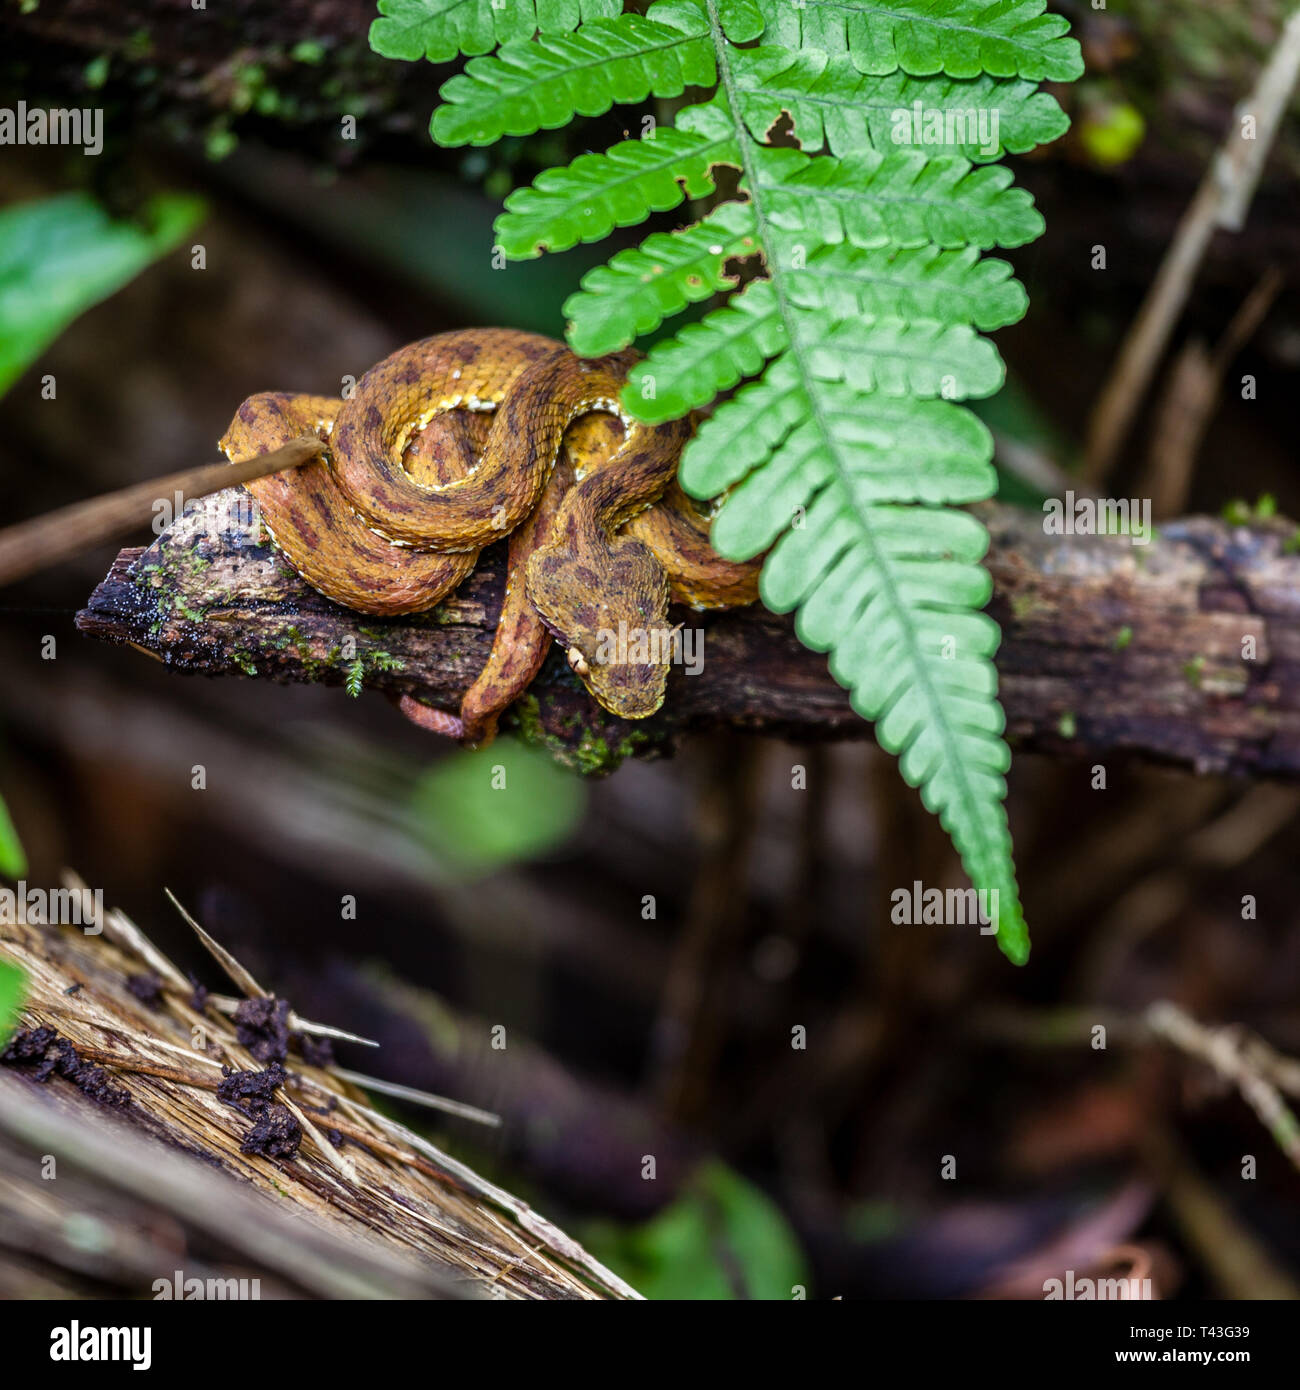 Coiled up baby eyelash viper in Arenal Hanging Bridges Park in Costa Rica Stock Photo